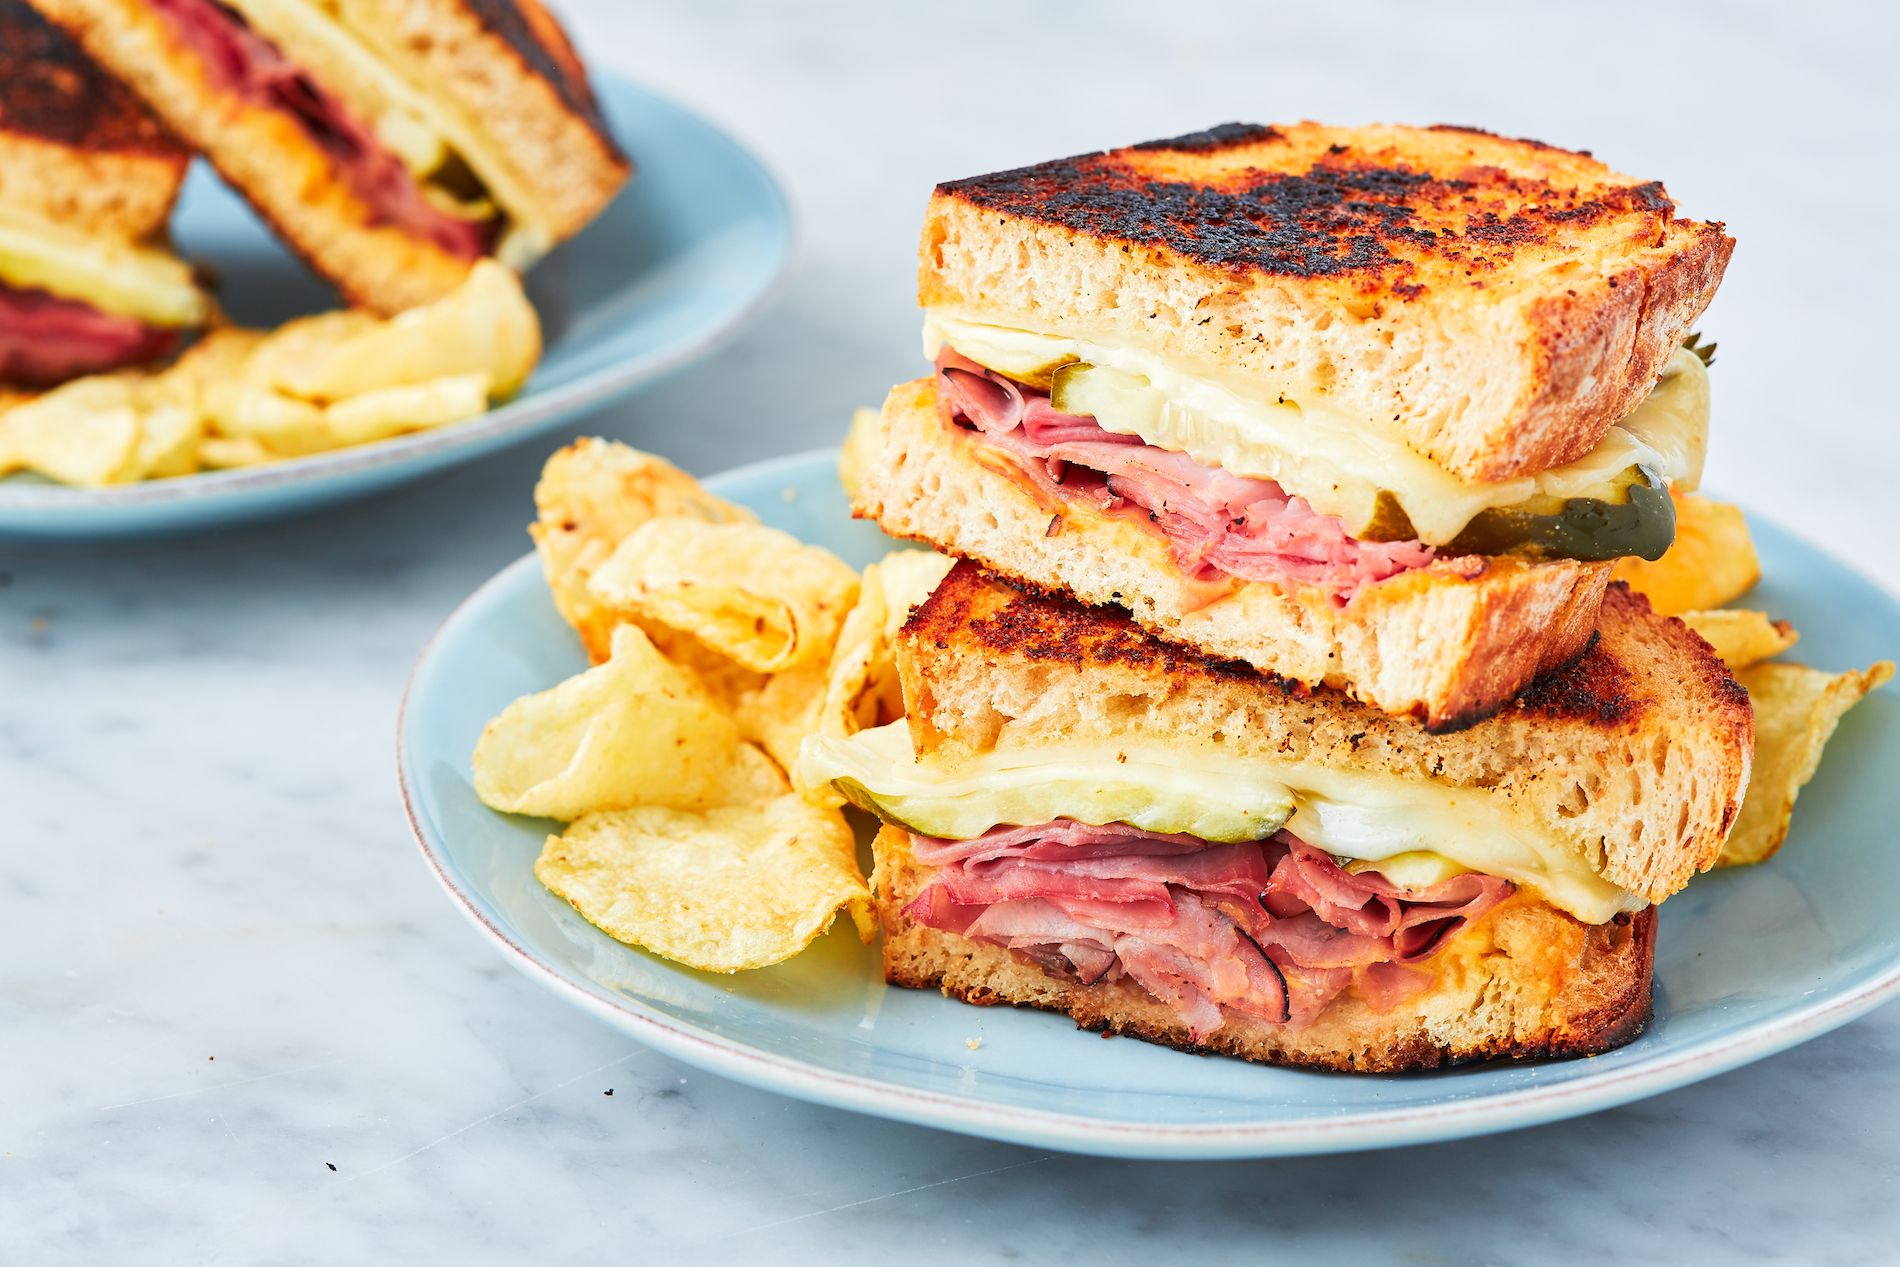 How To Make A Ham Cheese Sandwich Ham Cheese Sandwich Recipe From Delish Com